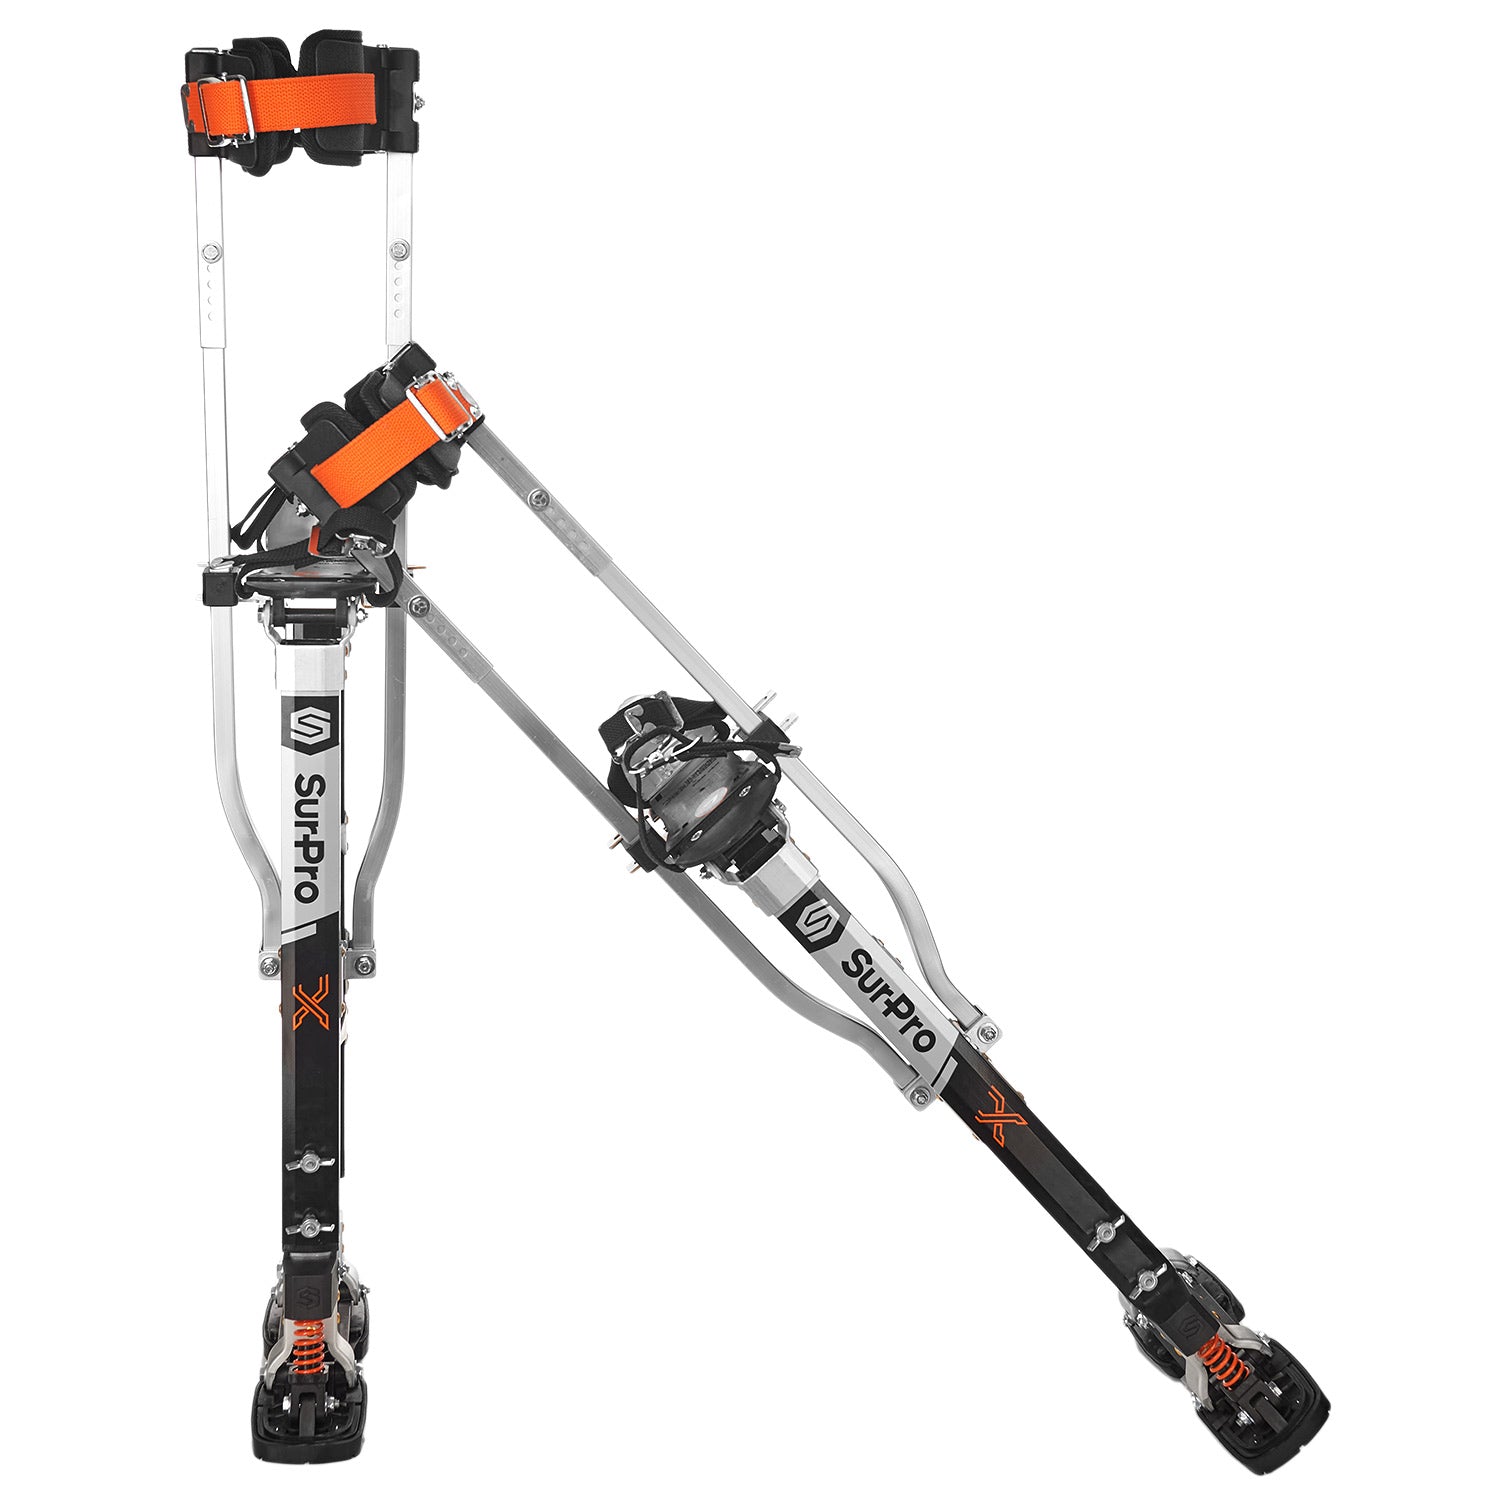 How do you stand your drywall stilts up while on a jobsite?